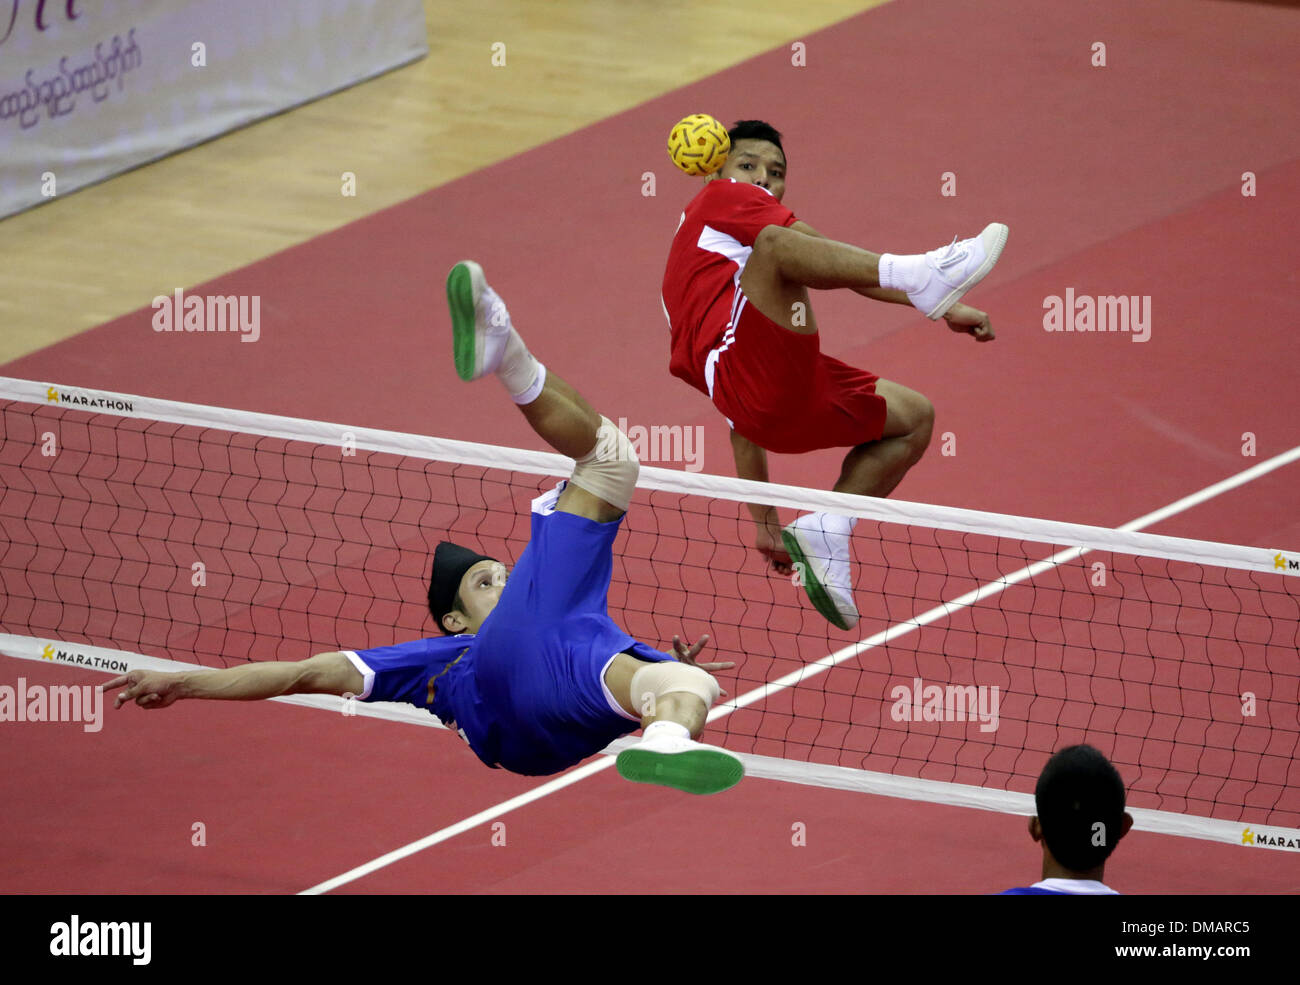 Nay Pyi Taw, Myanmar. 13th Dec, 2013. A player of Thailand (front) hits a shot during the men's Sepak Takraw match between Thailand and Indonesia in the 27th Southeast Asian (SEA) Games in Nay Pyi Taw, Myanmar, Dec. 12, 2013. © U Aung/Xinhua/Alamy Live News Stock Photo